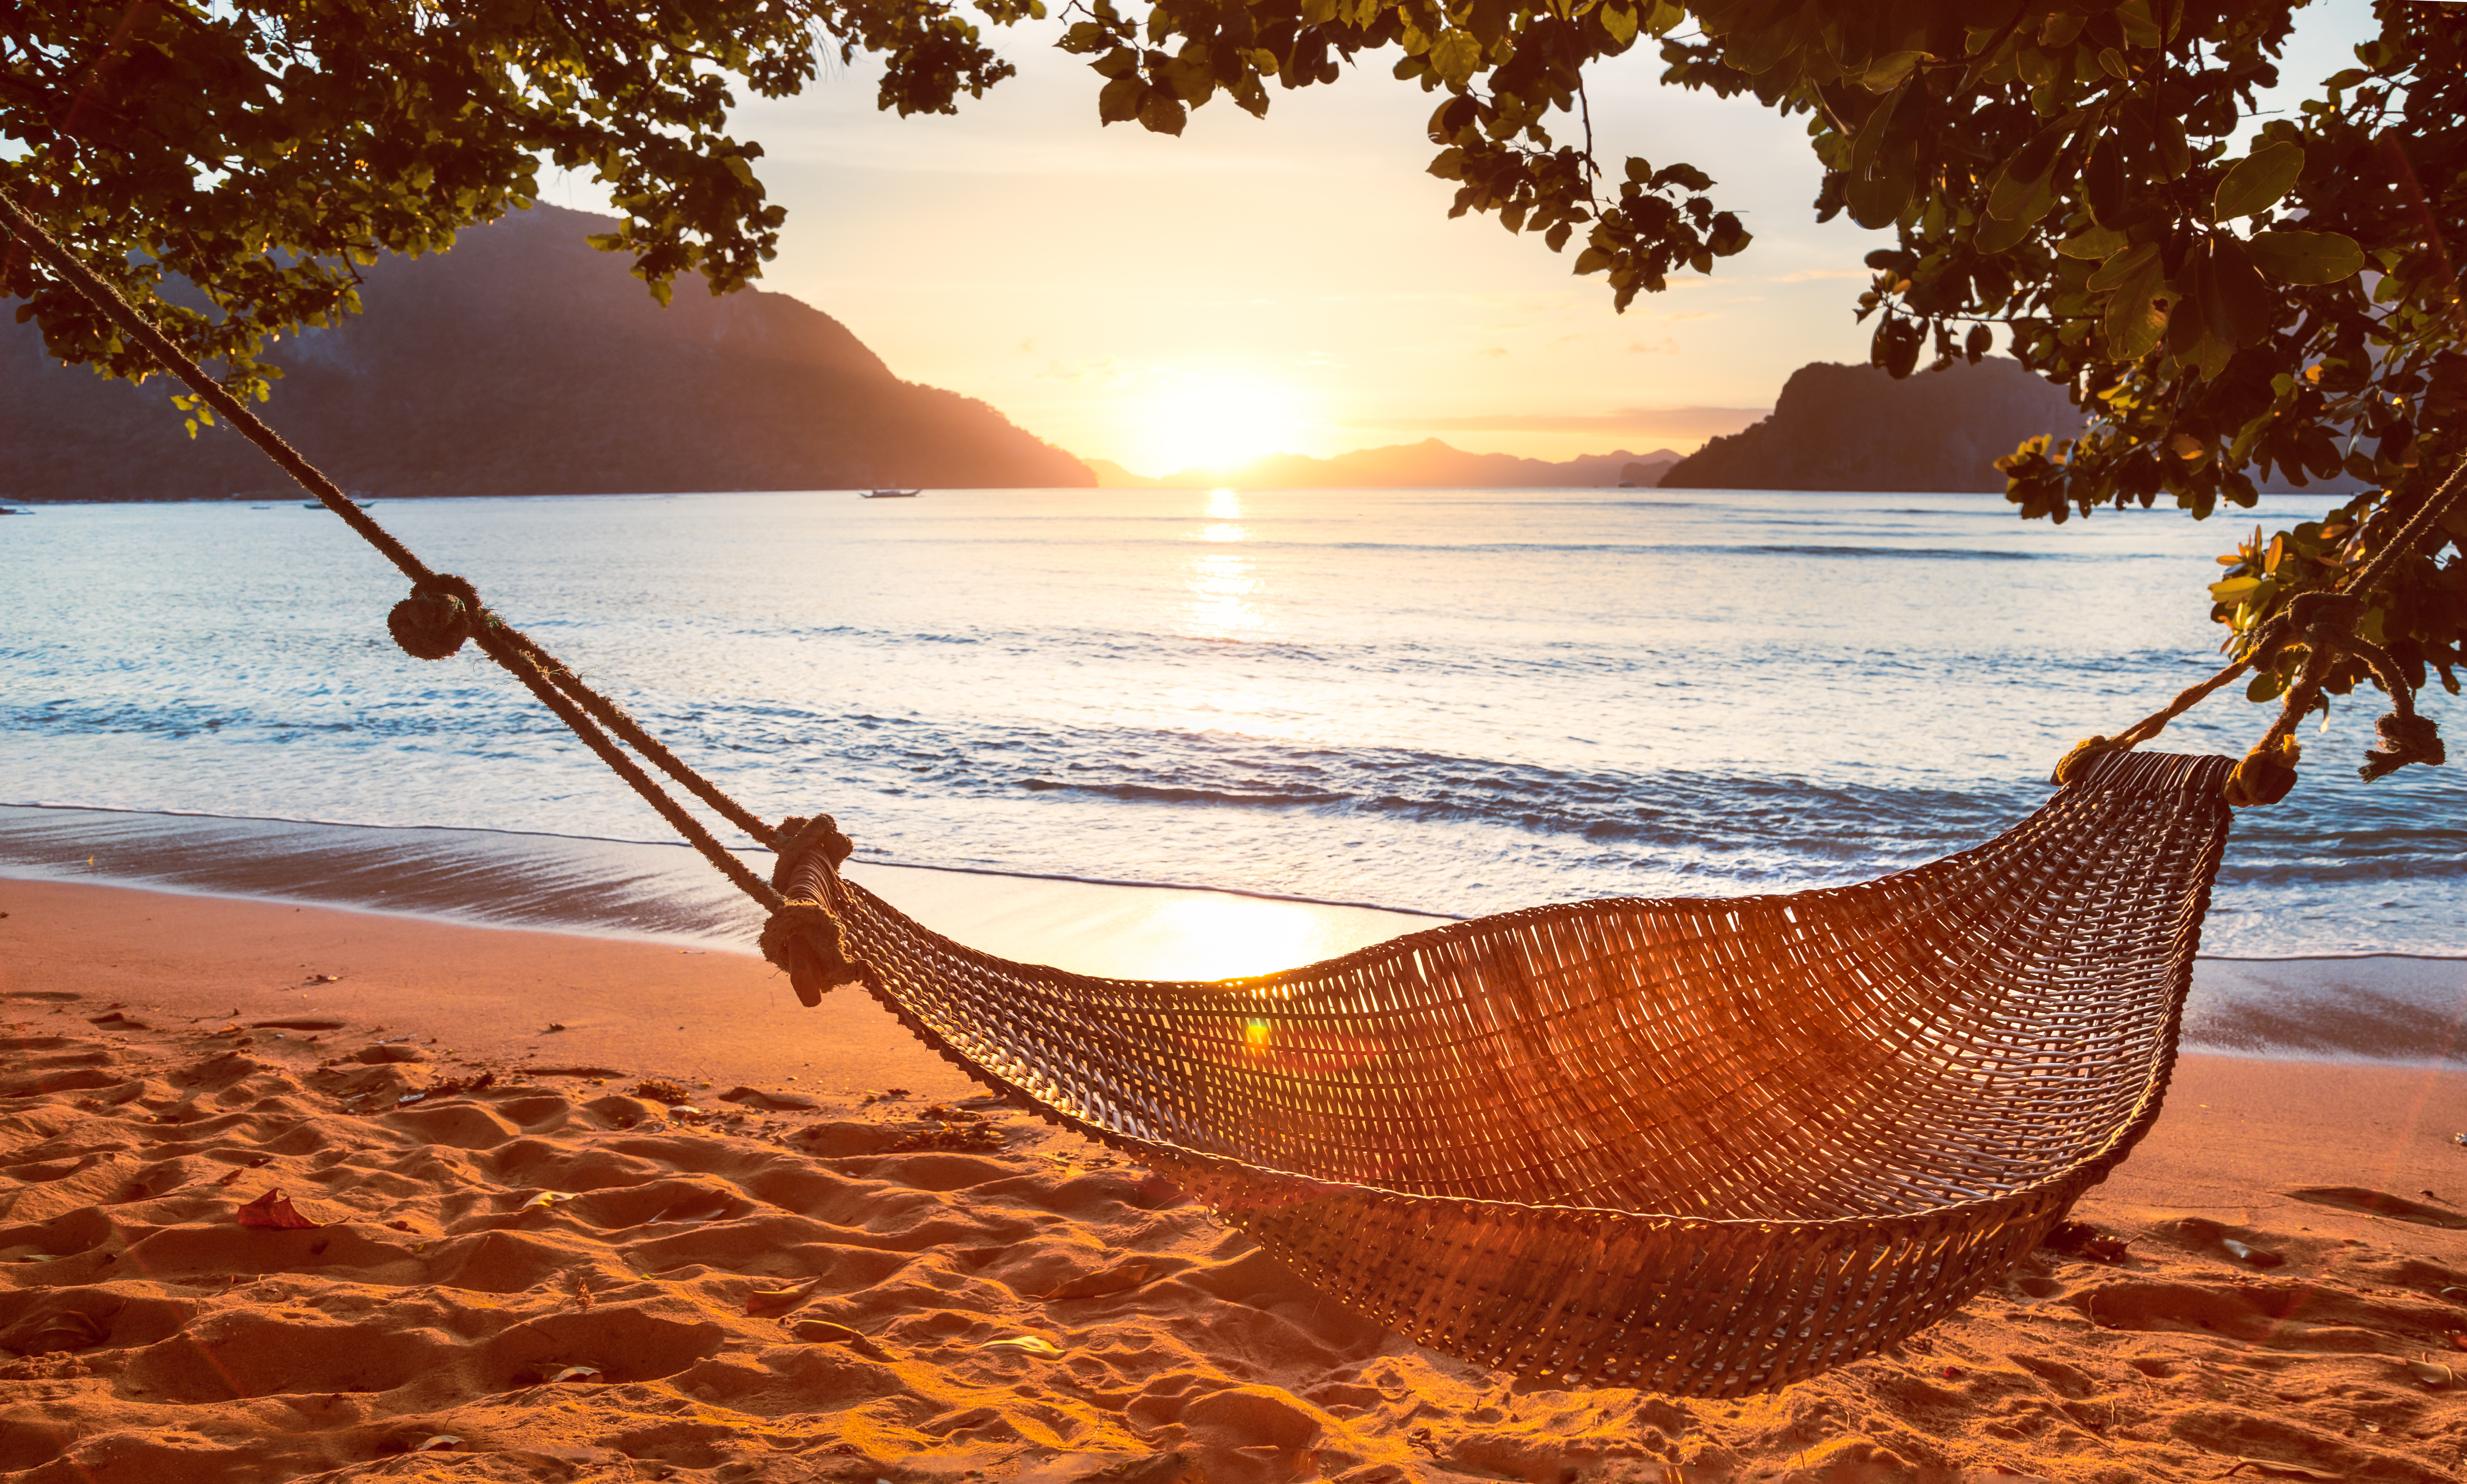 Hypnosis story to treat insomnia at sunset on a tropical island